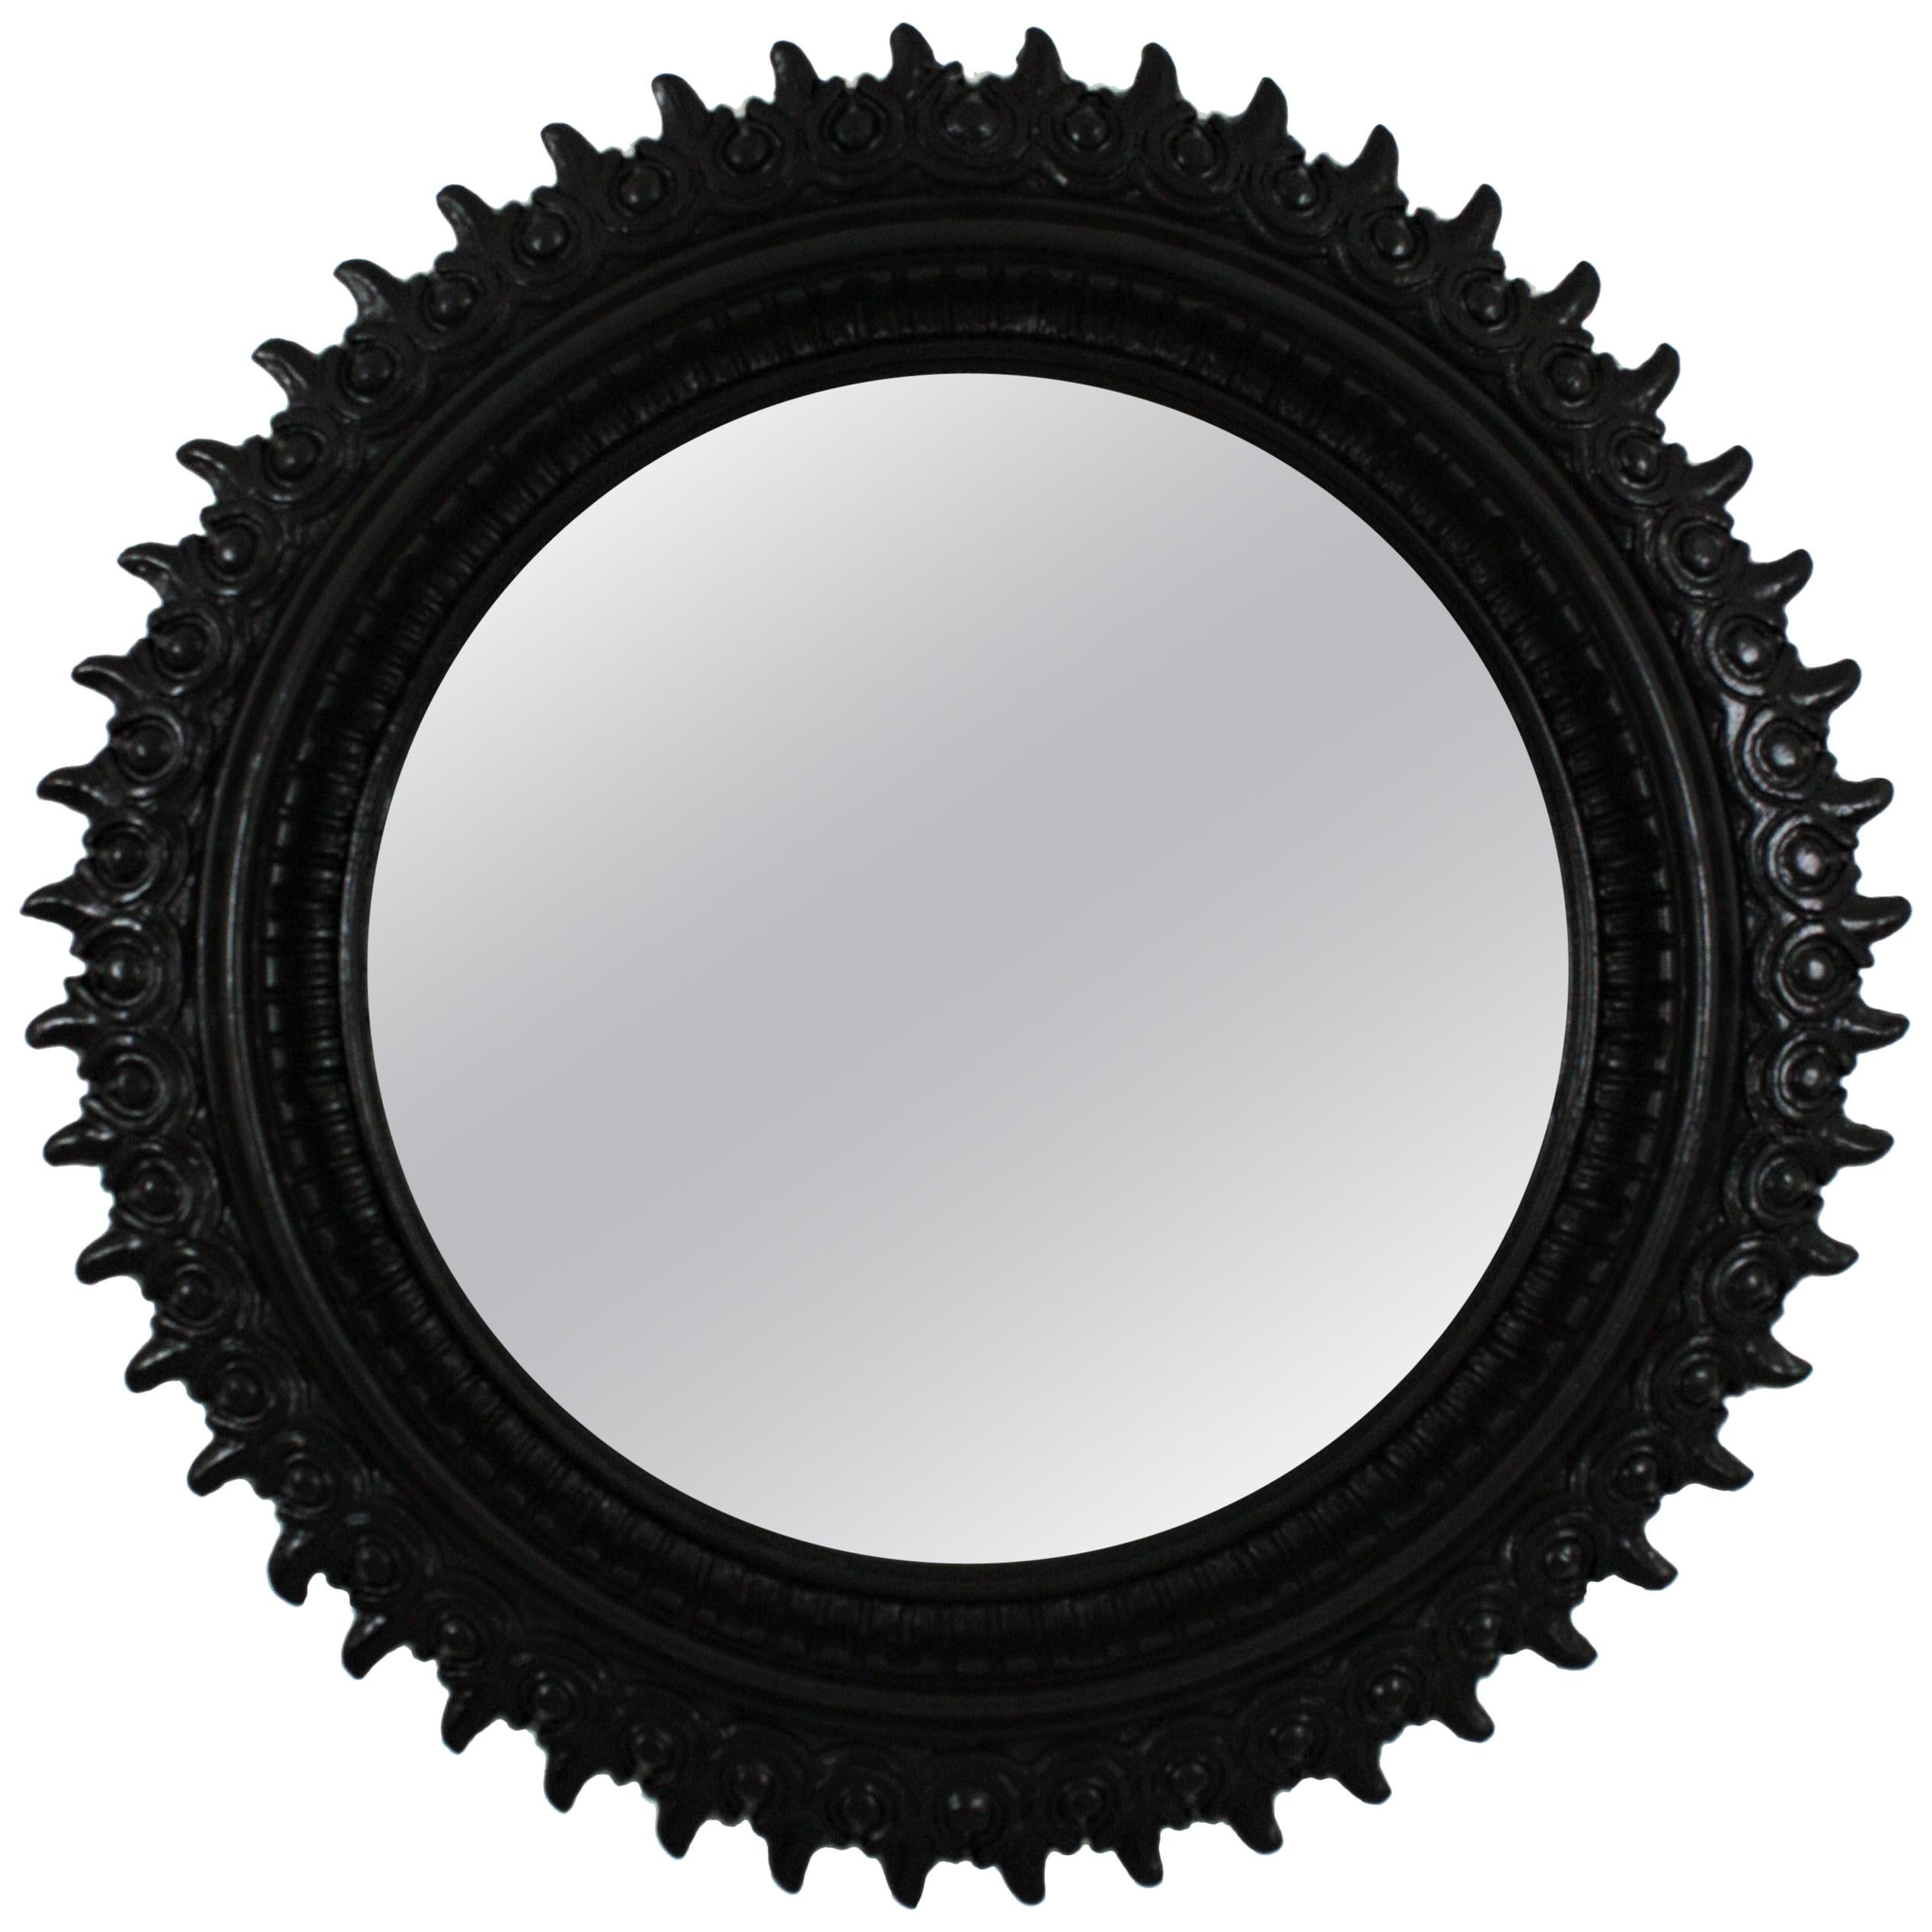 Sunburst Mirror in Carved Wood and Black Patina by Francisco Hurtado